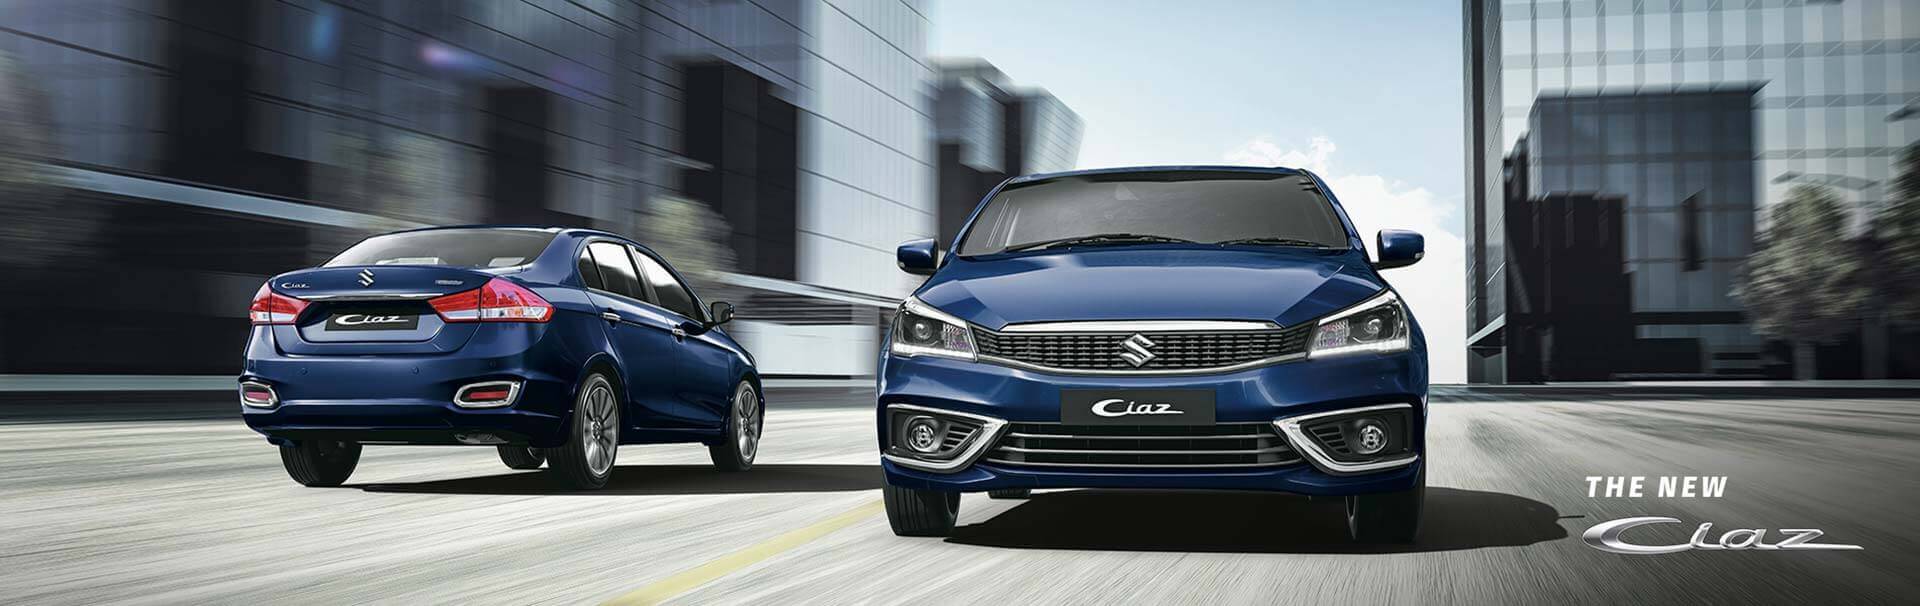 Ciaz S Onroad price in Chennai